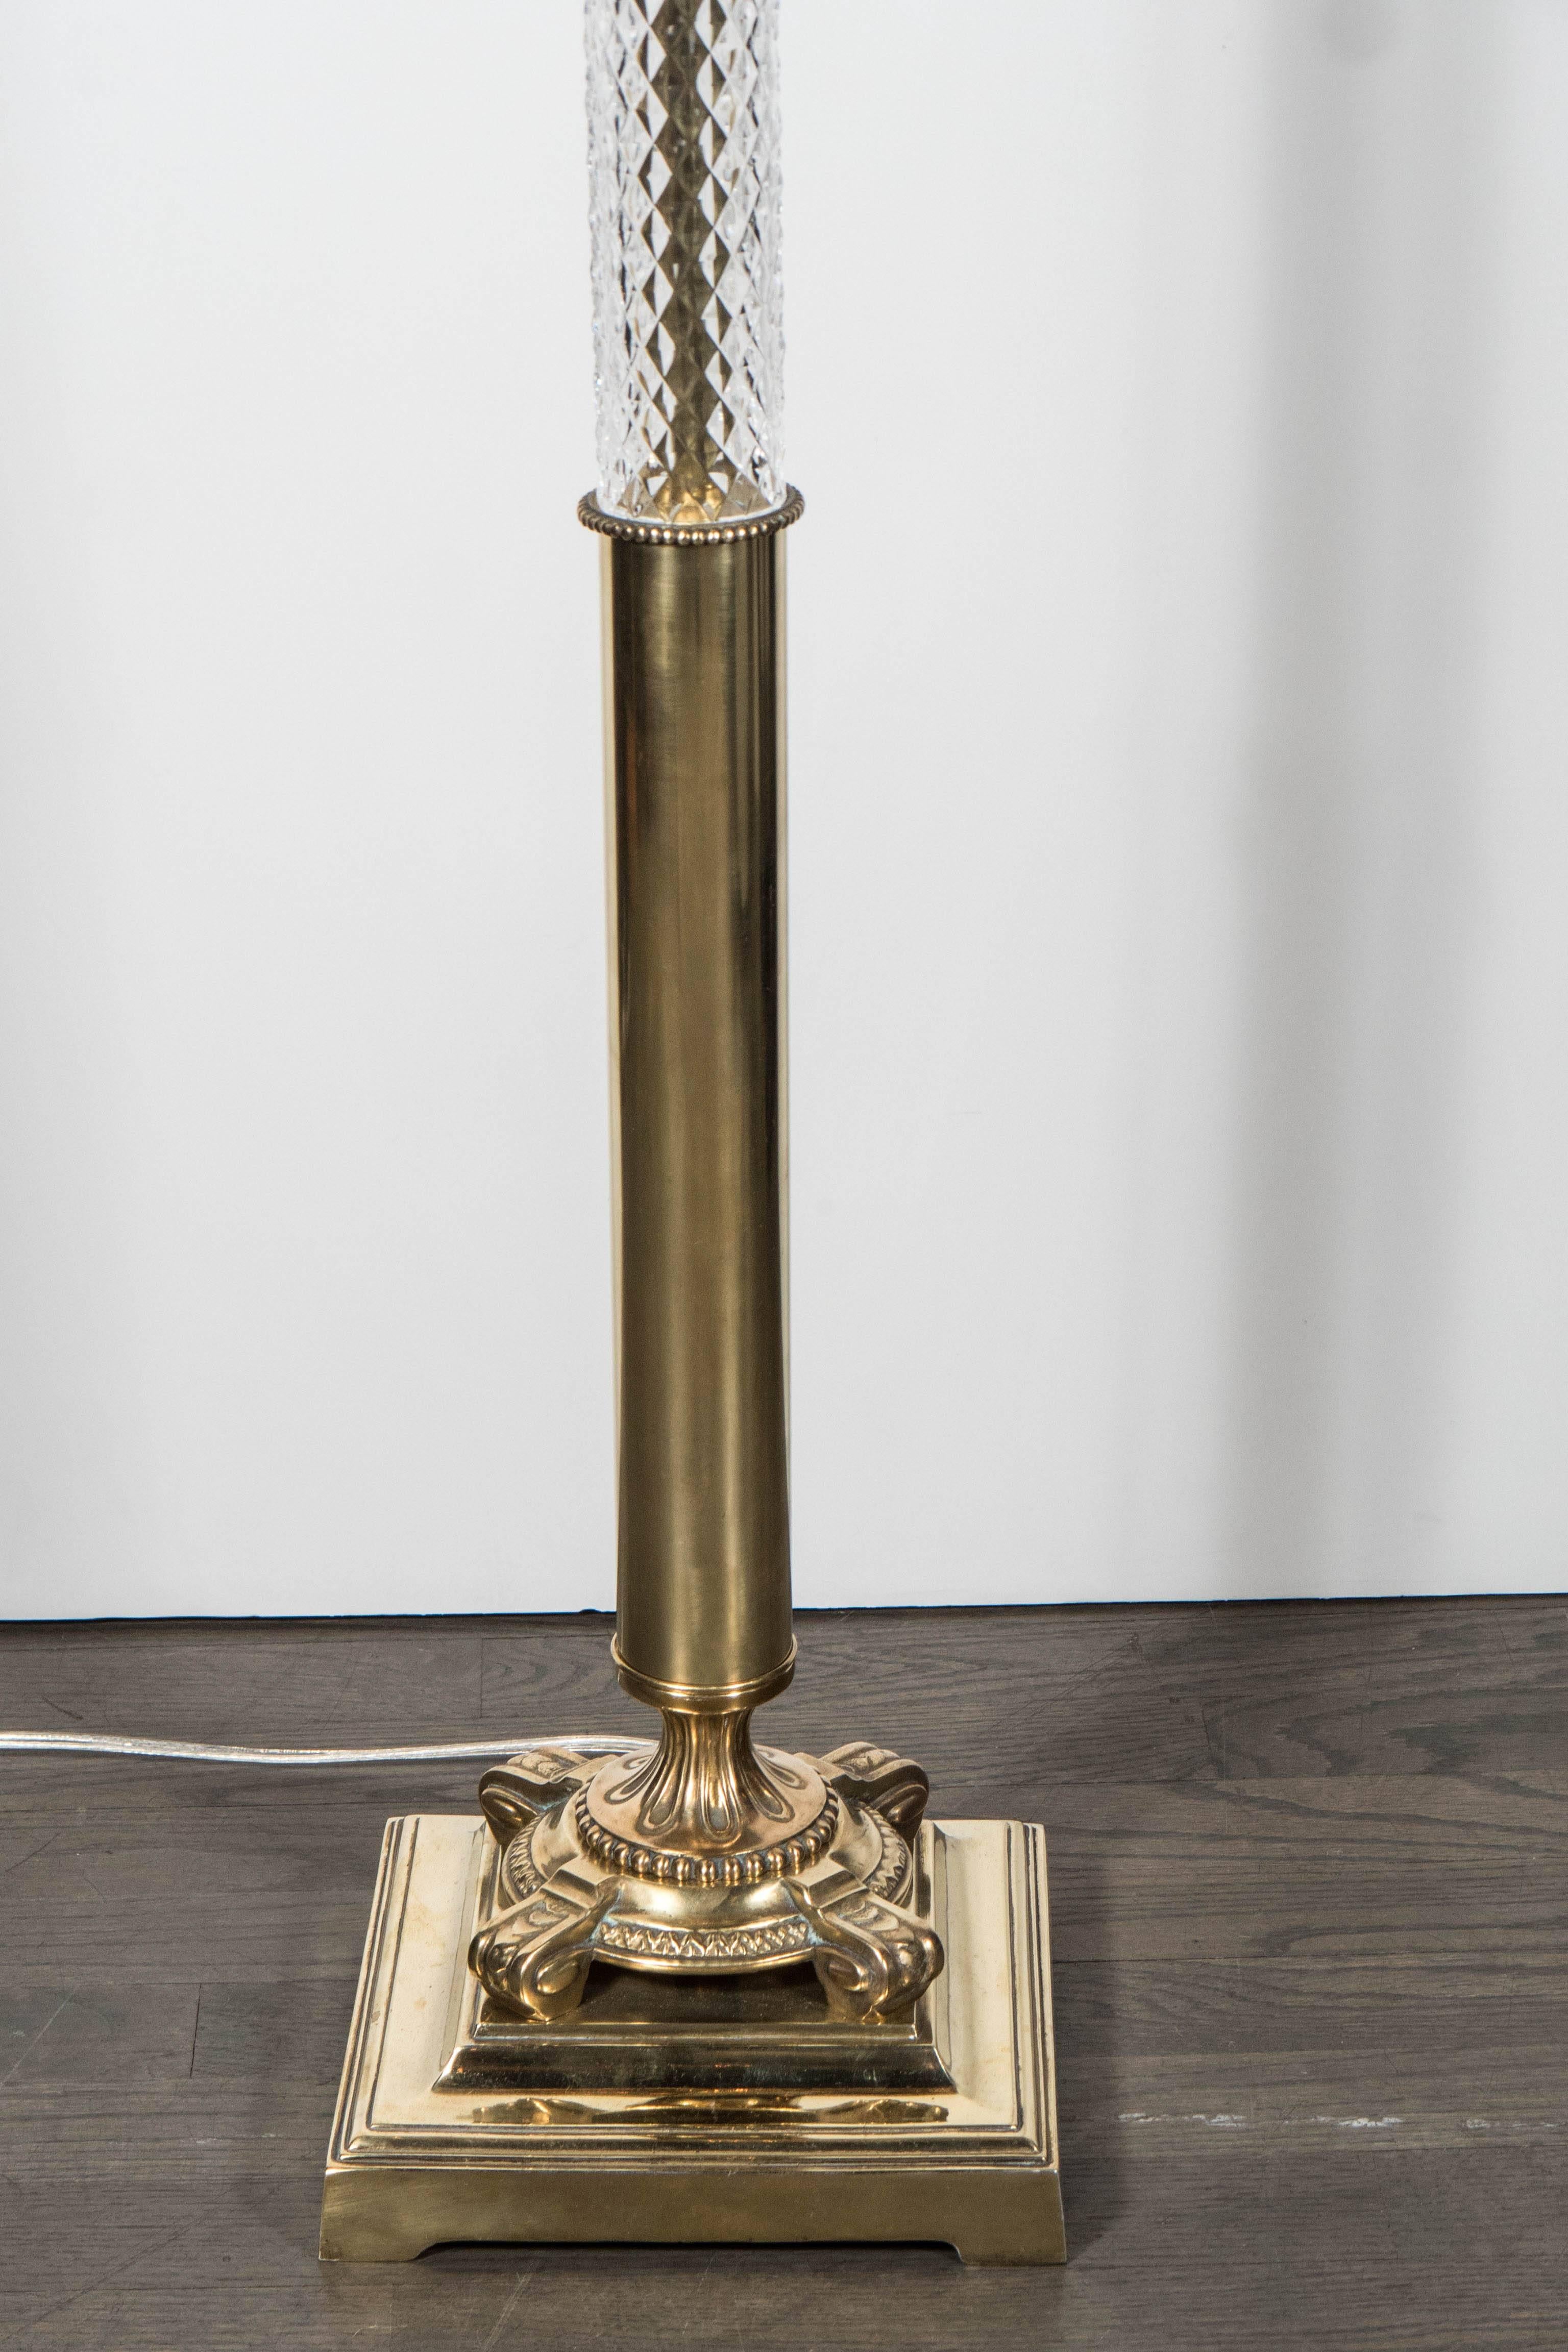 This stunning Art Deco floor lamp consists of a square brass base with elaborate fluted and beaded detailing throughout, it has three segments of textured glass separated by a brass beaded detail, at the top of the stem is a brass urn form detail.